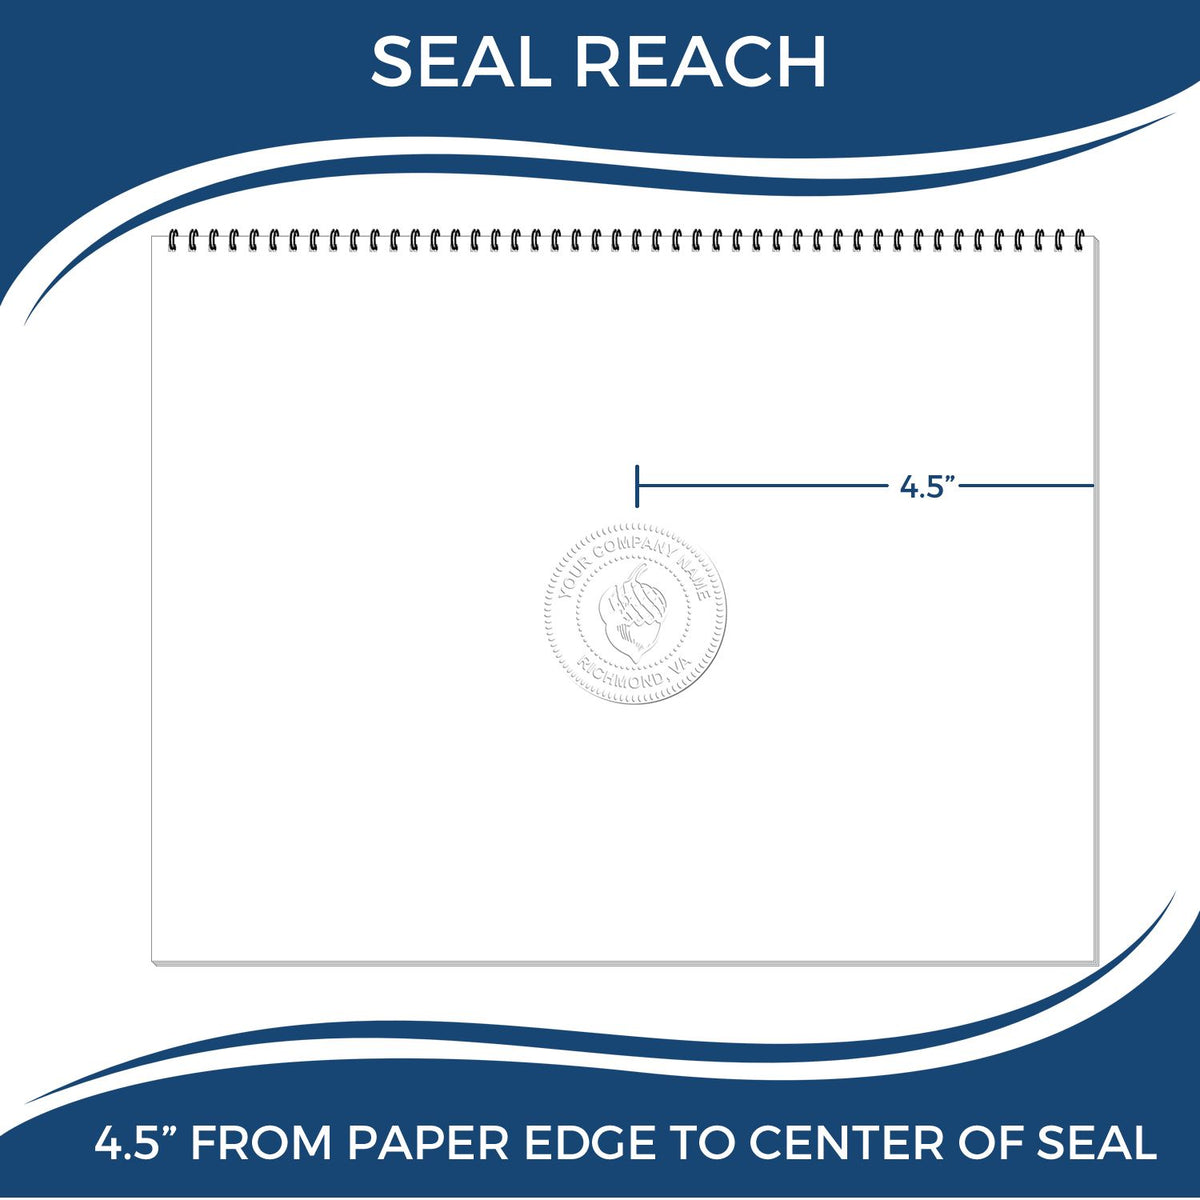 An infographic showing the seal reach which is represented by a ruler and a miniature seal image of the State of Mississippi Extended Long Reach Geologist Seal